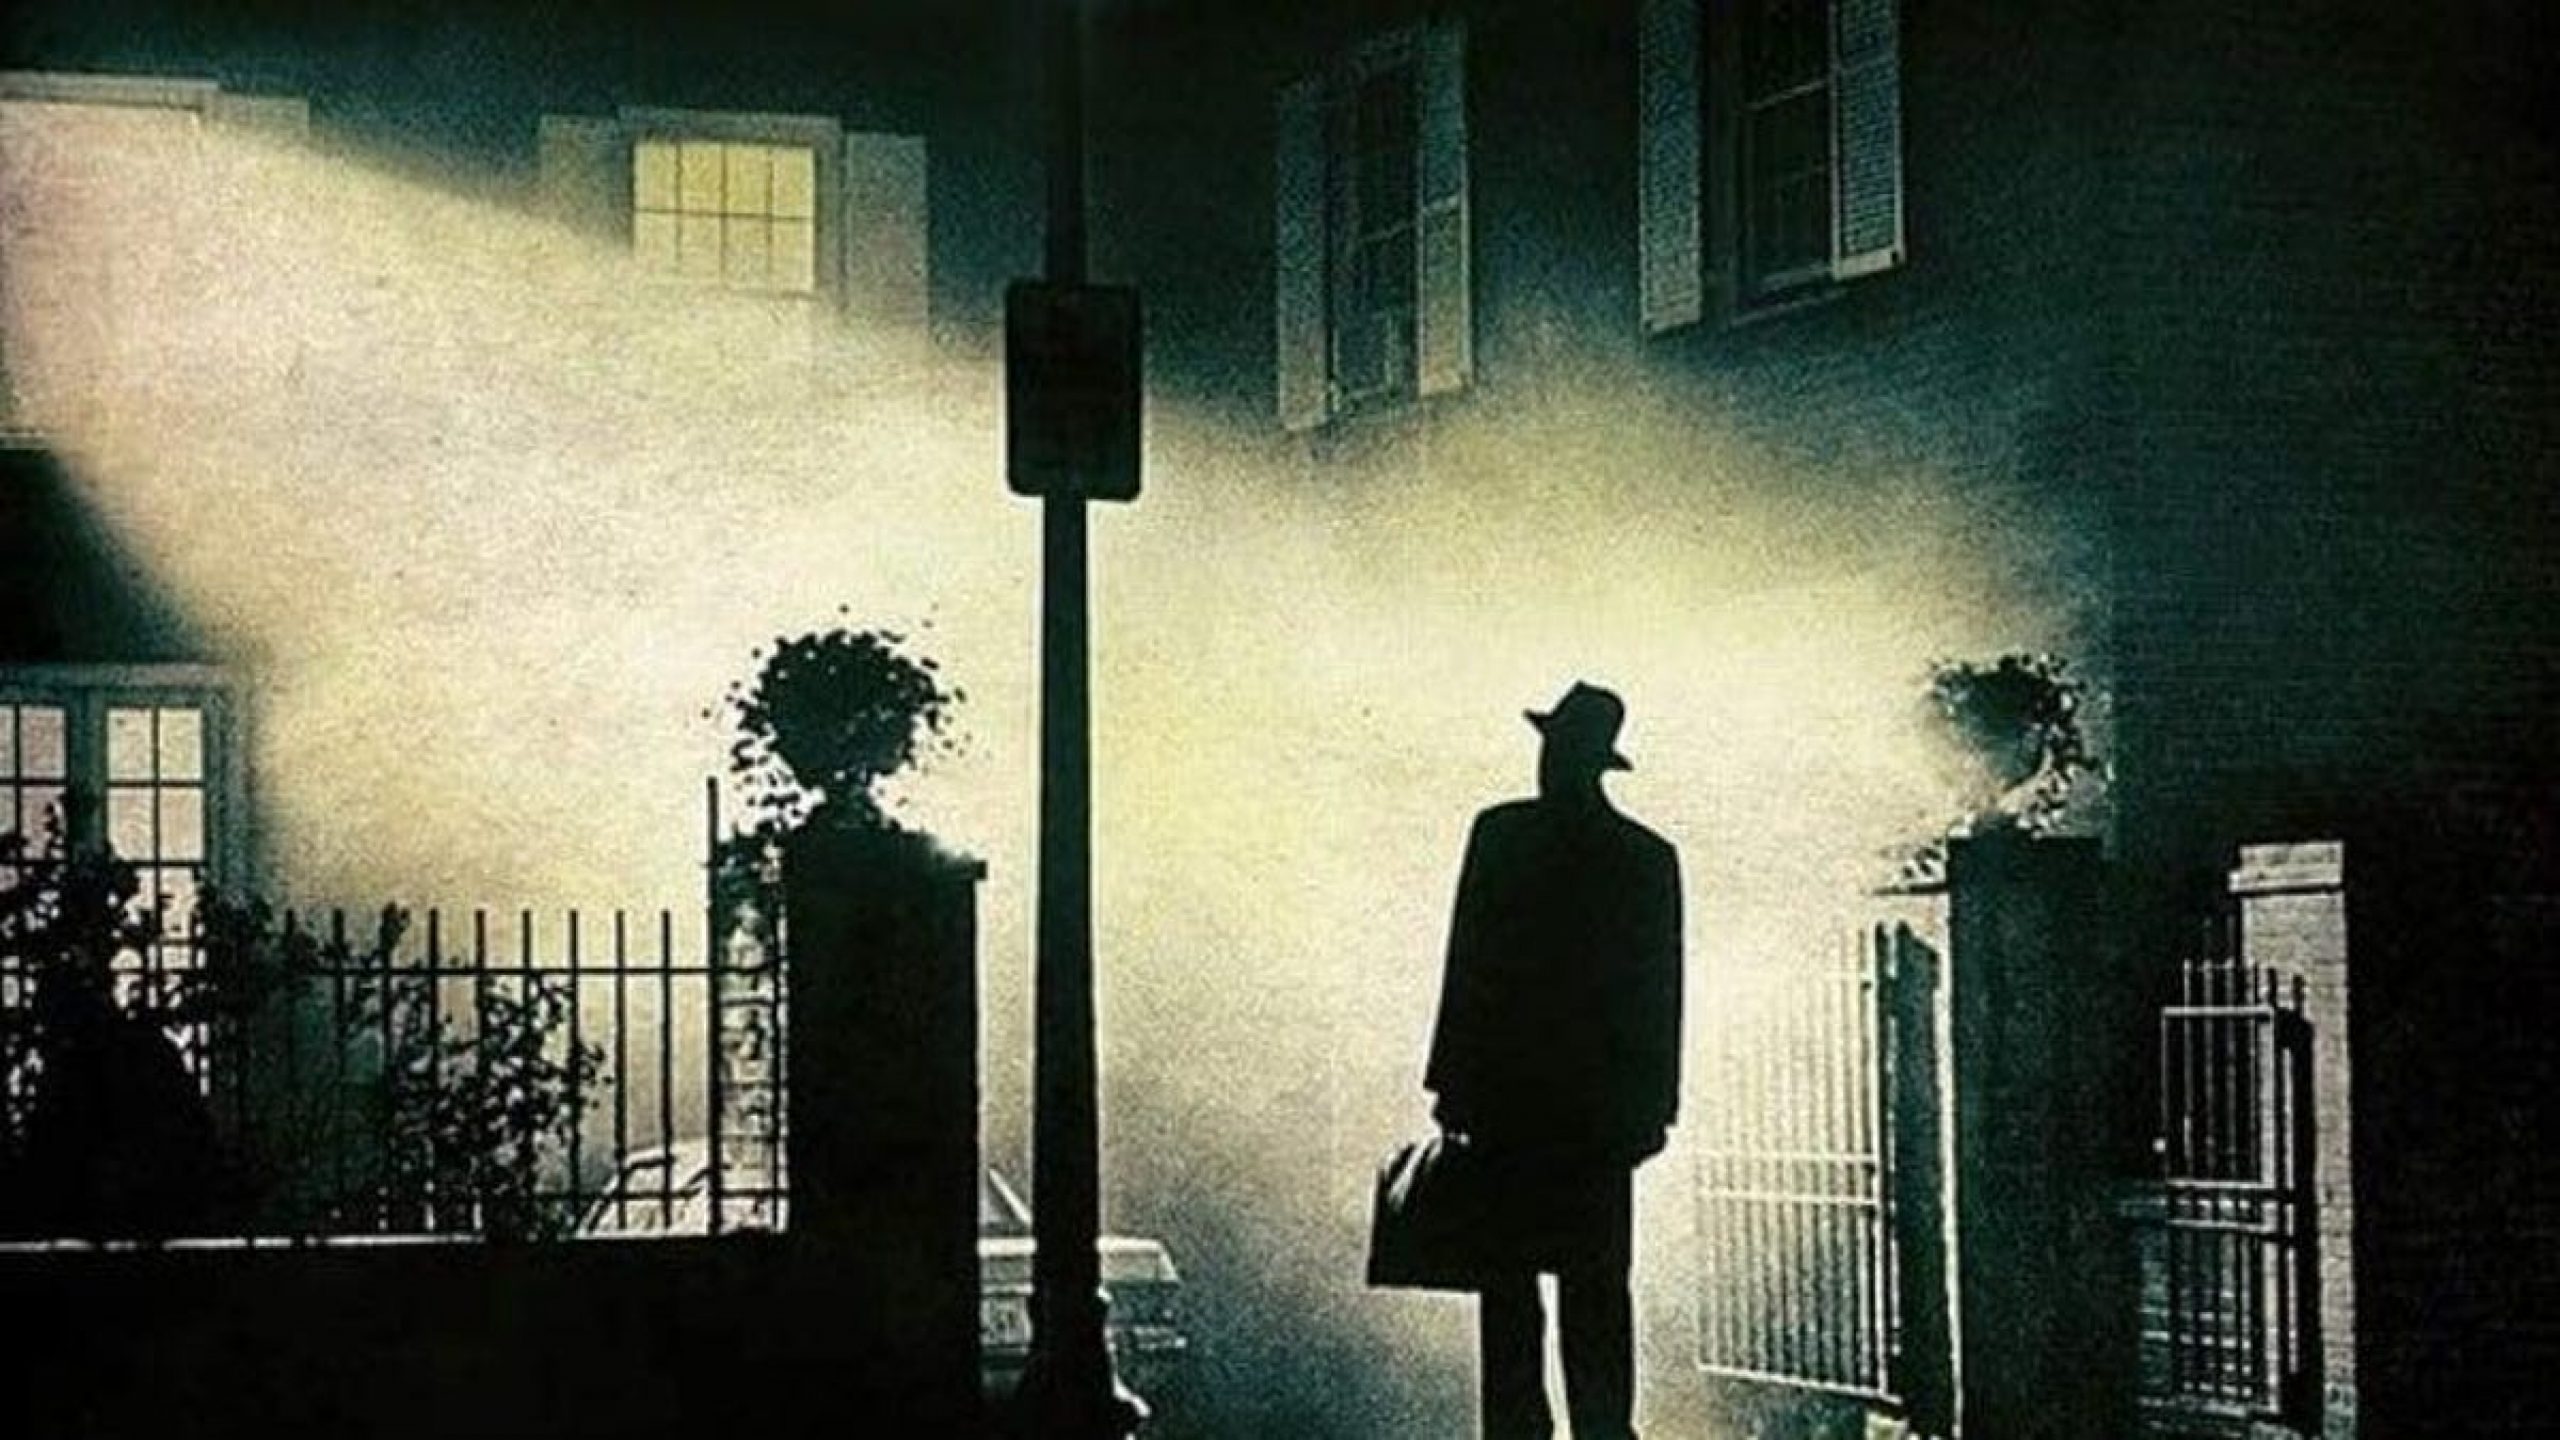 A New Exorcist Trilogy Is Coming From Universal and Blumhouse